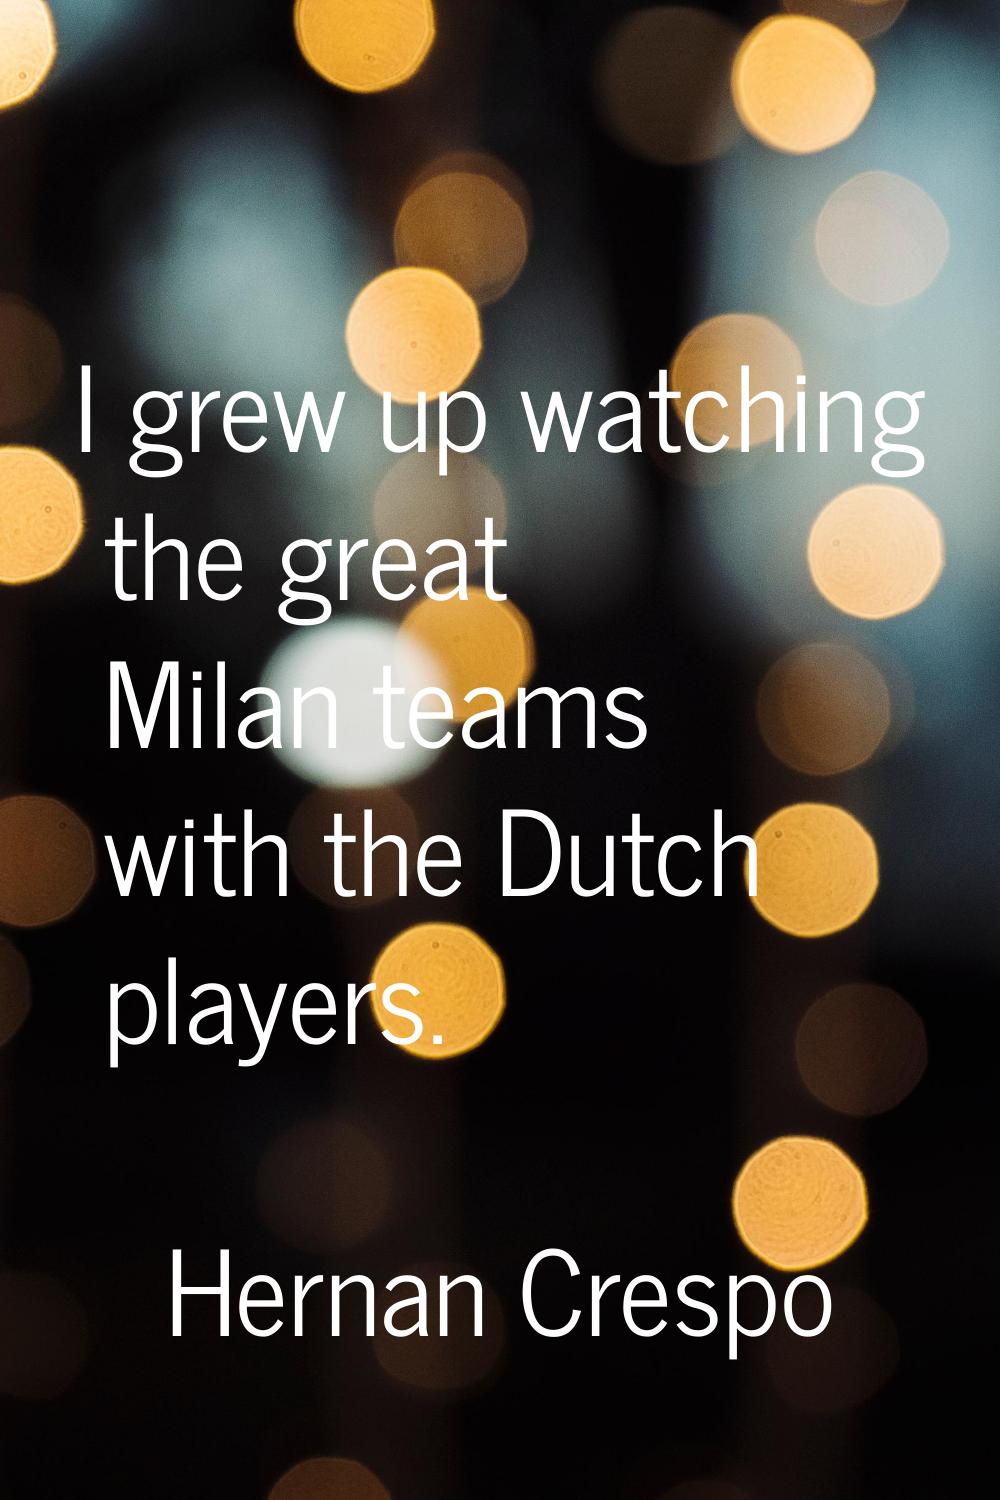 I grew up watching the great Milan teams with the Dutch players.